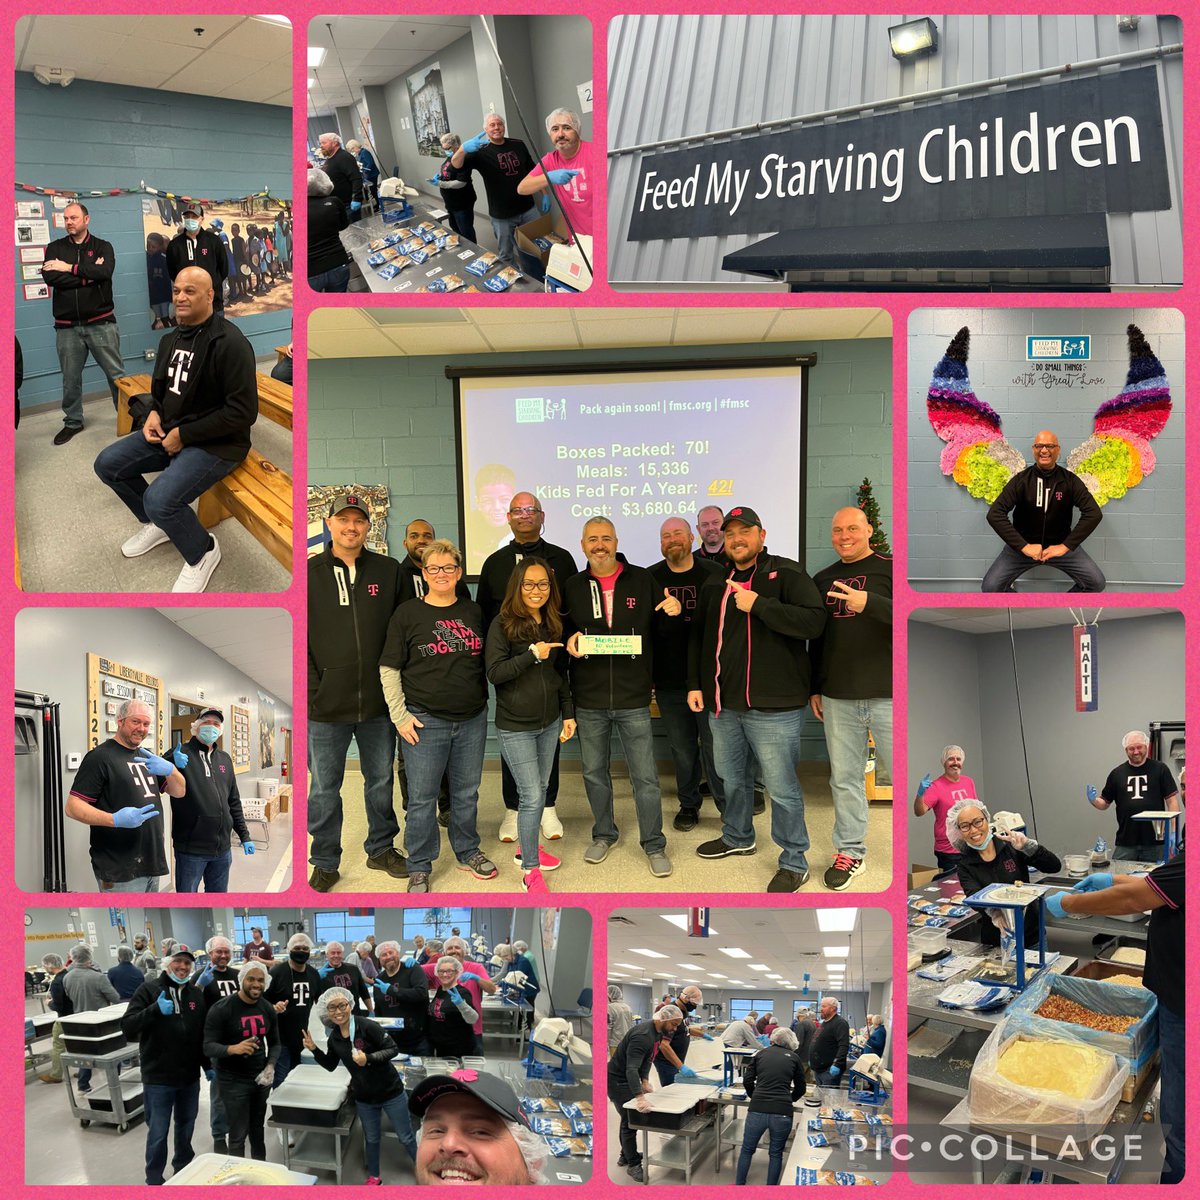 So proud of our @TMobile #ILMO #SMRA team for partnering with the amazing @fmsc_org in Libertyville IL! This group packed 15,336 meals to feed 42 starving children in Haiti for a YEAR! #Giving #Proud @pedrobyers1 @ChartierDoug @JohnStevens @JonFreier